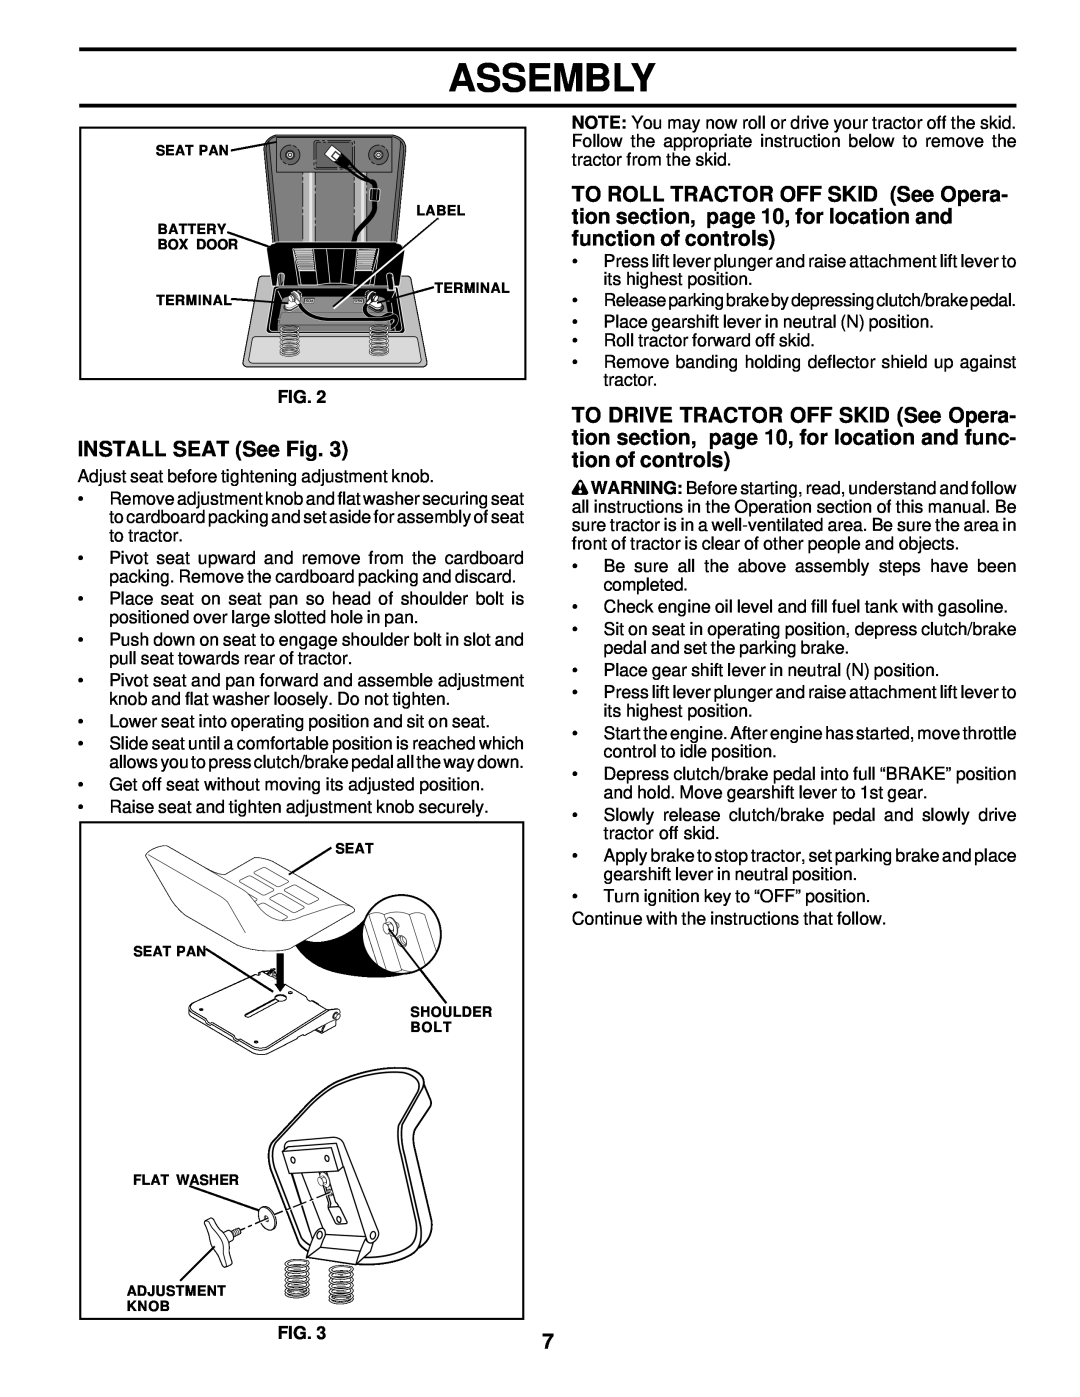 Poulan 178108 owner manual INSTALL SEAT See Fig, Assembly 